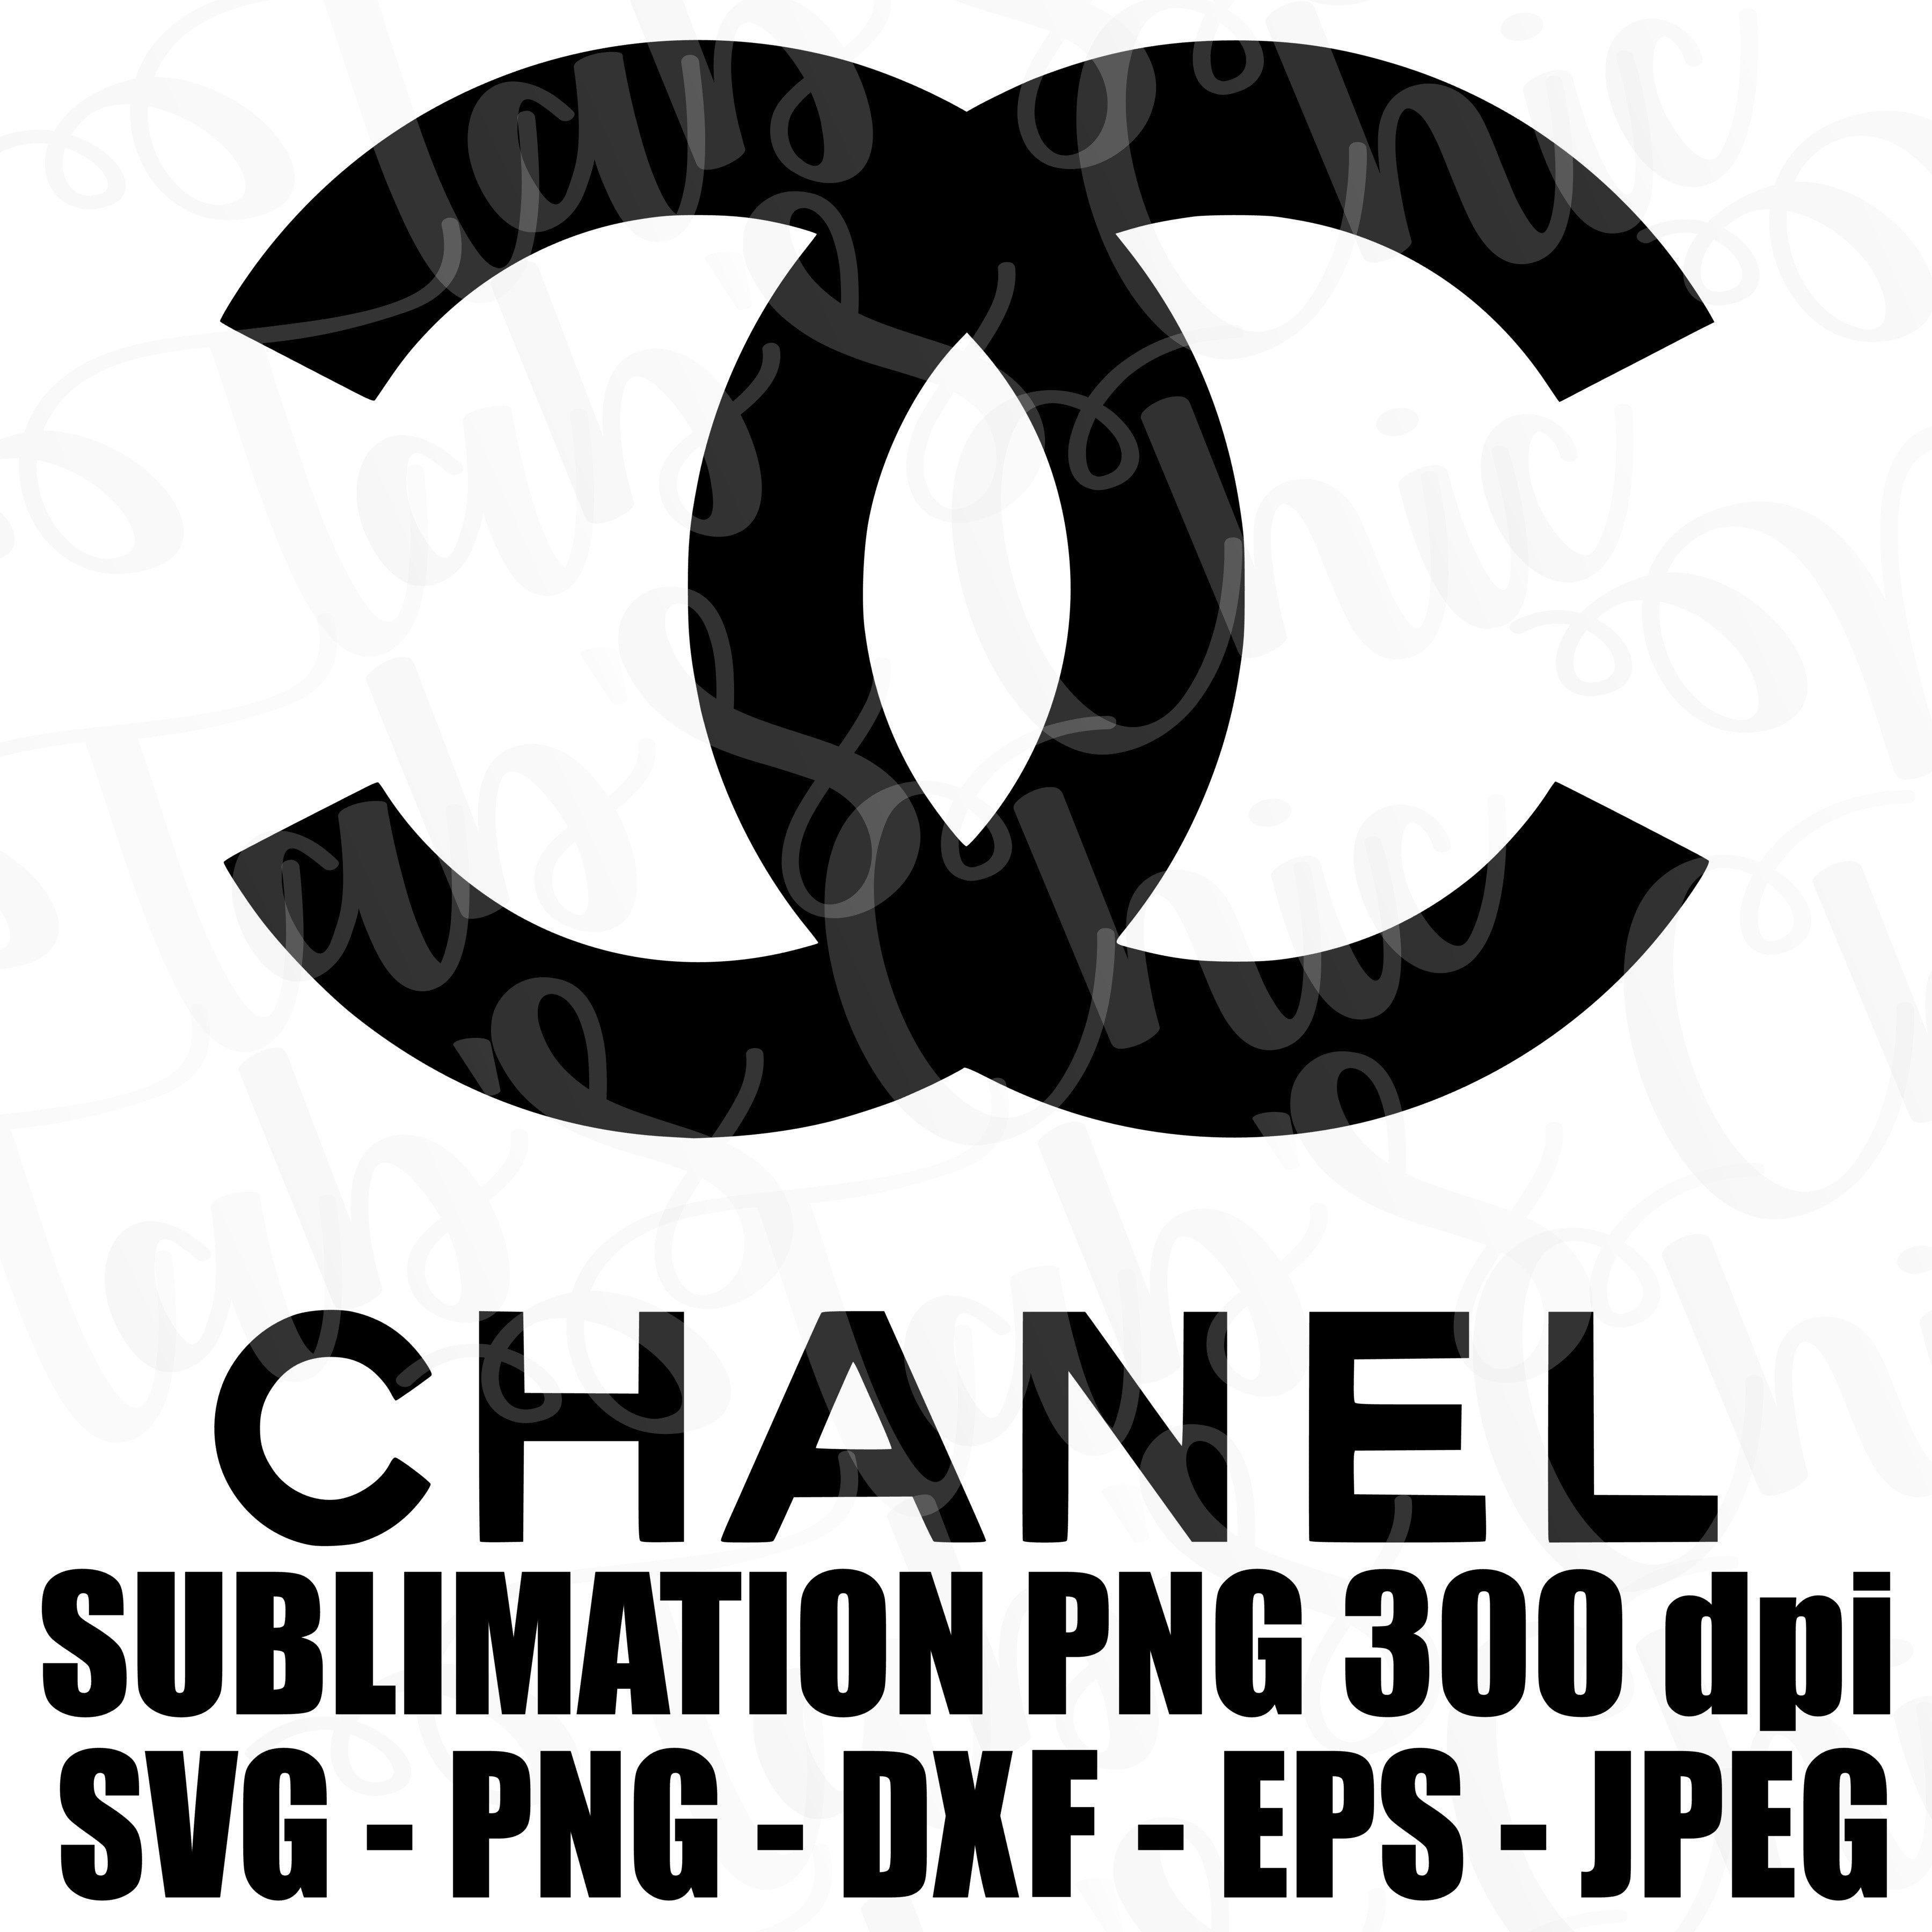 Coco Chanel Logo Svg Jpeg High Def Png 300 Dpi Dxf Eps Sublimation Fil Tab S Chic Boutique